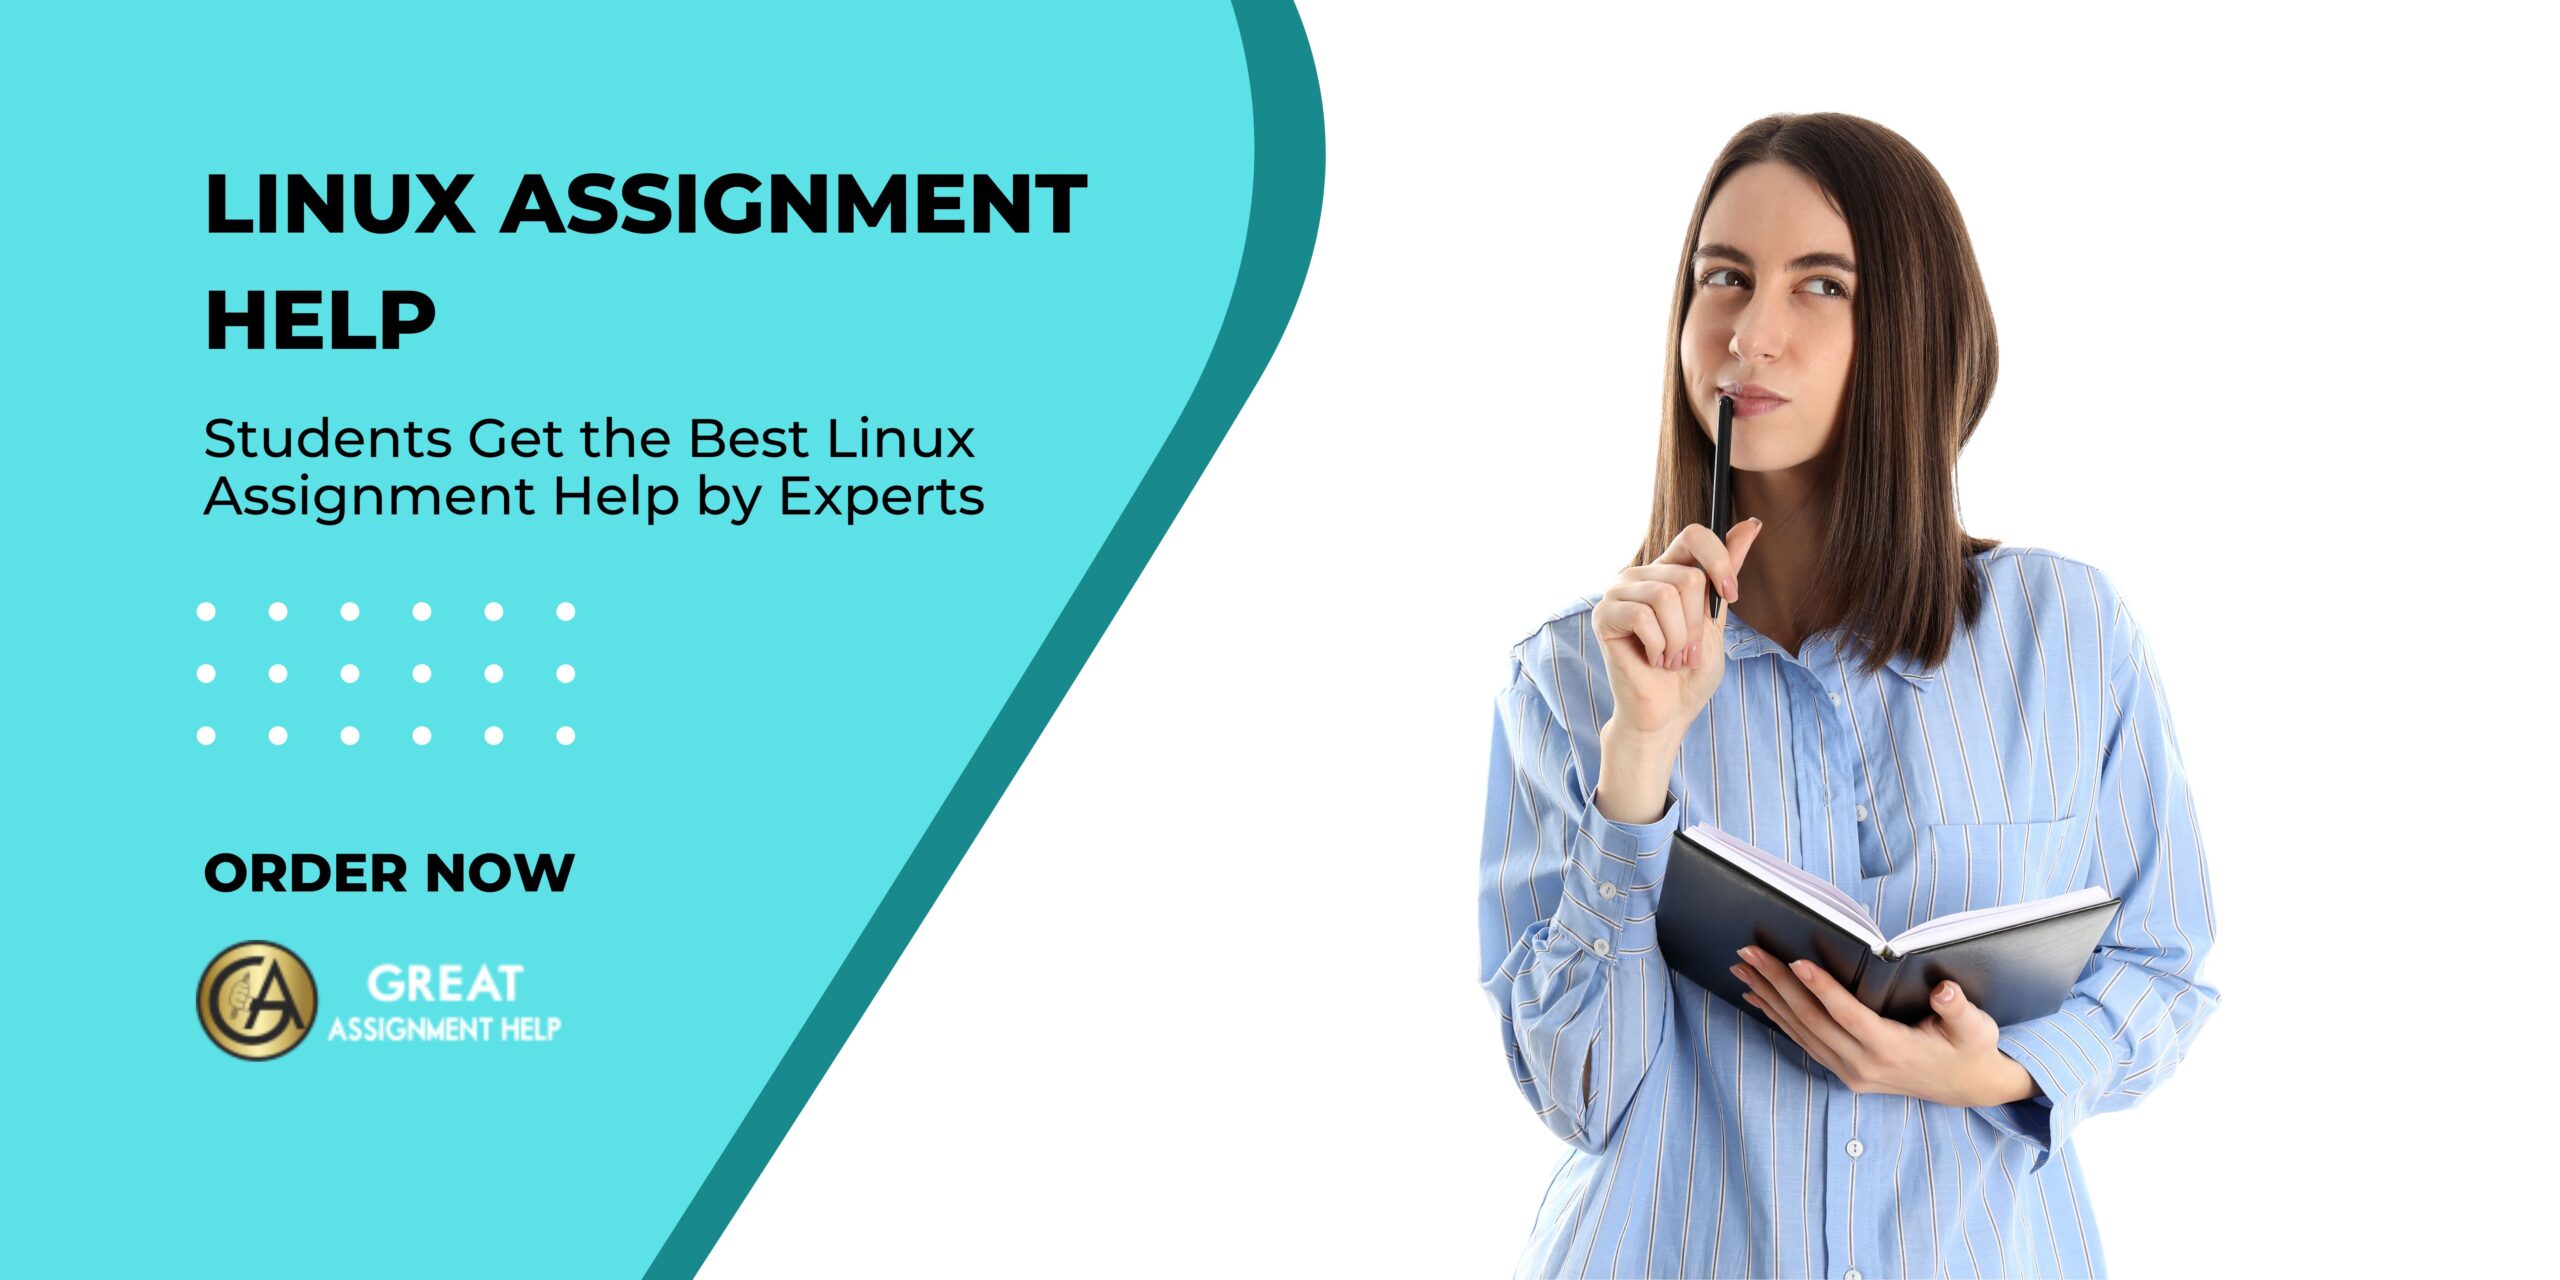 Linux Assignment Help Services by Experts - ADABUX